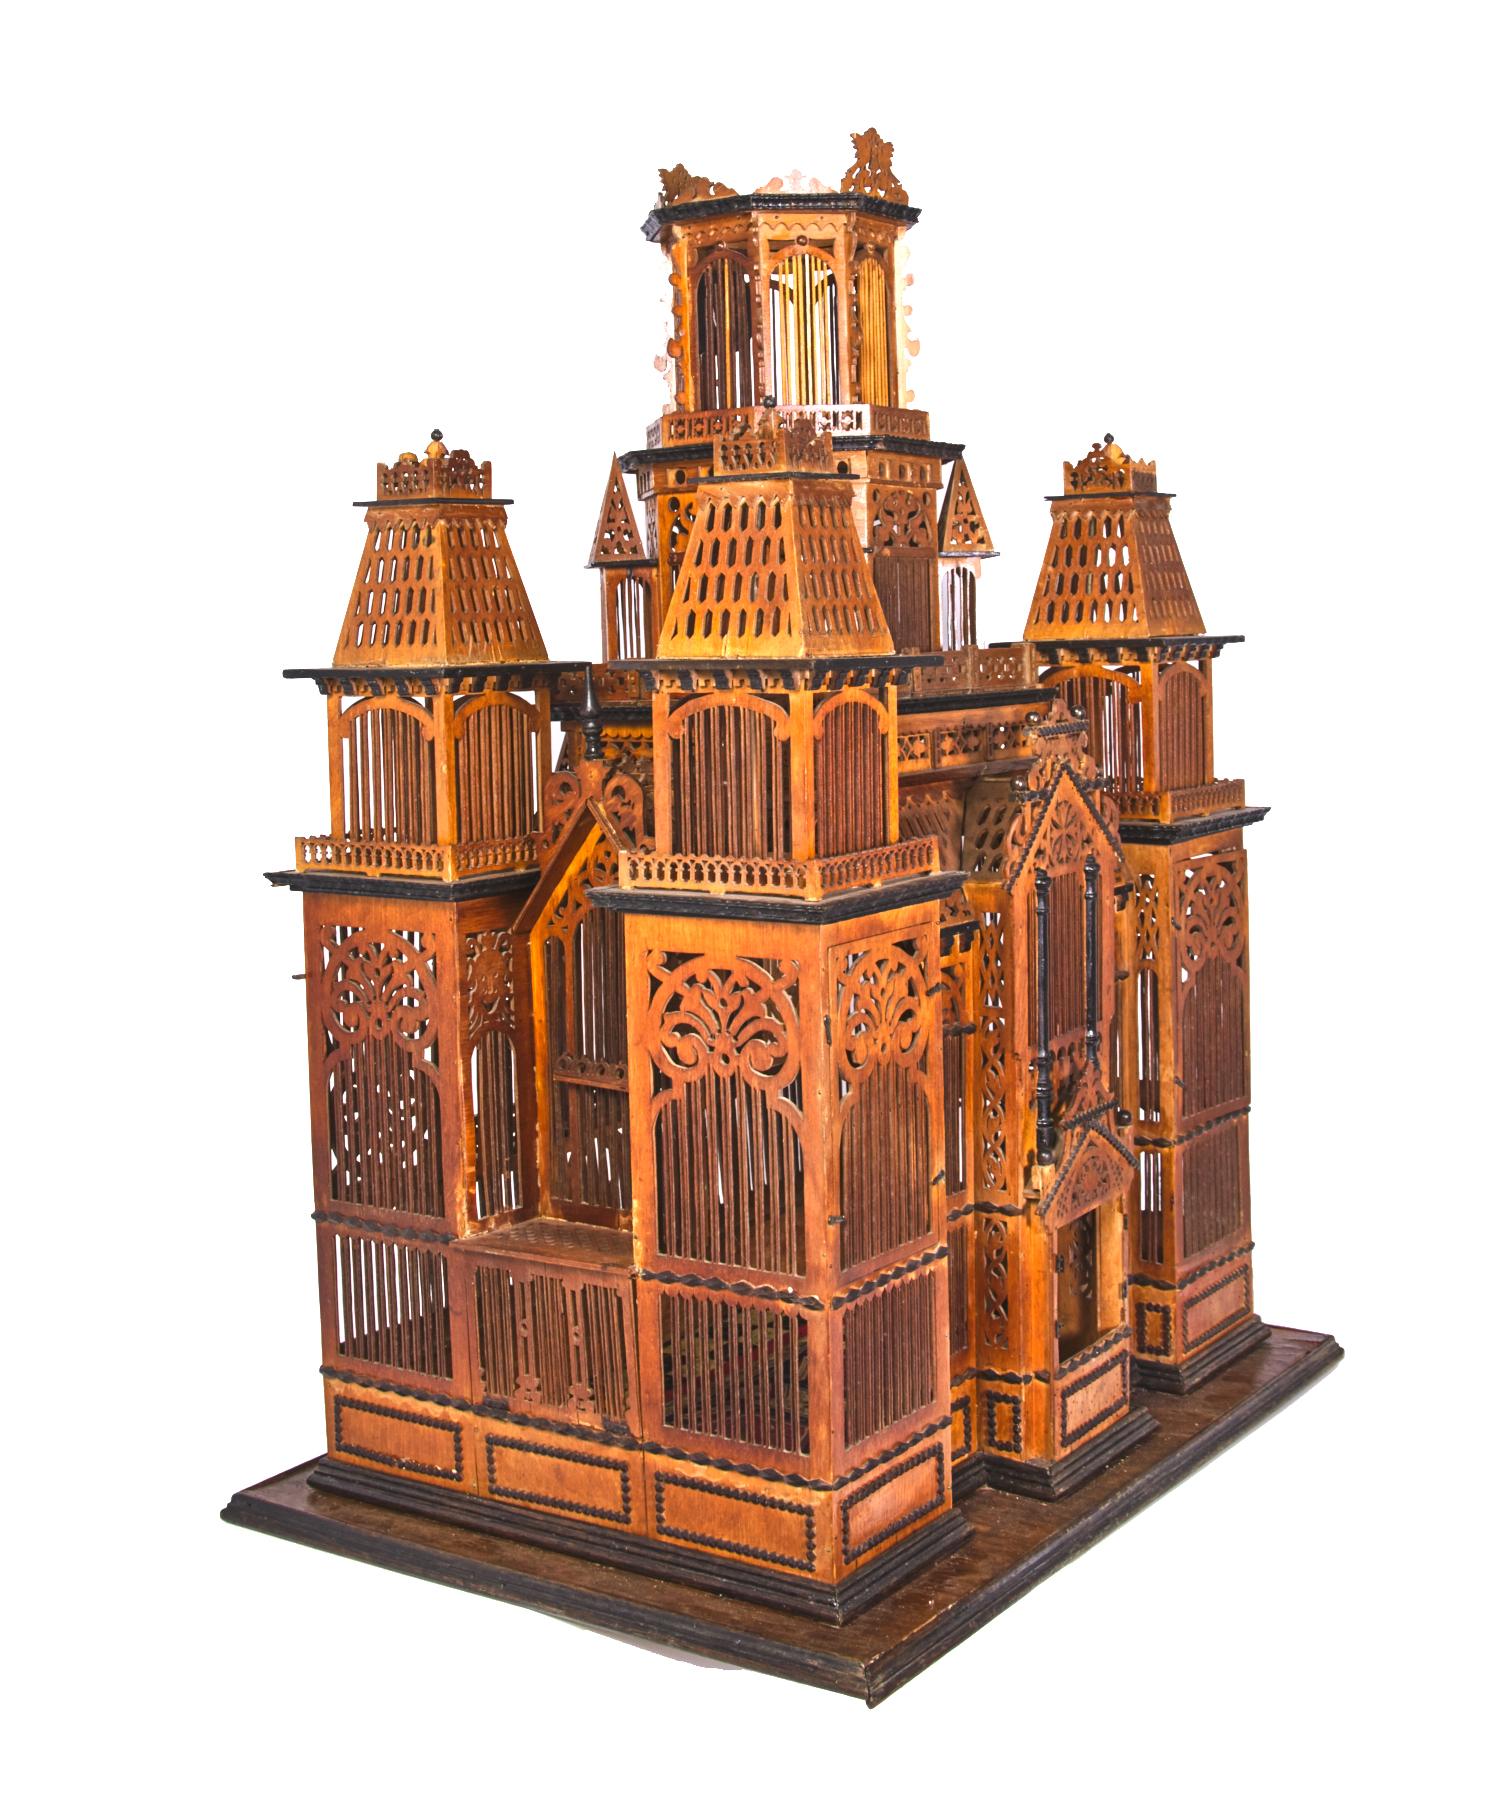 Exceptional Handmade Walnut Wood Birdcage from the Collection of Paul McDonald 2